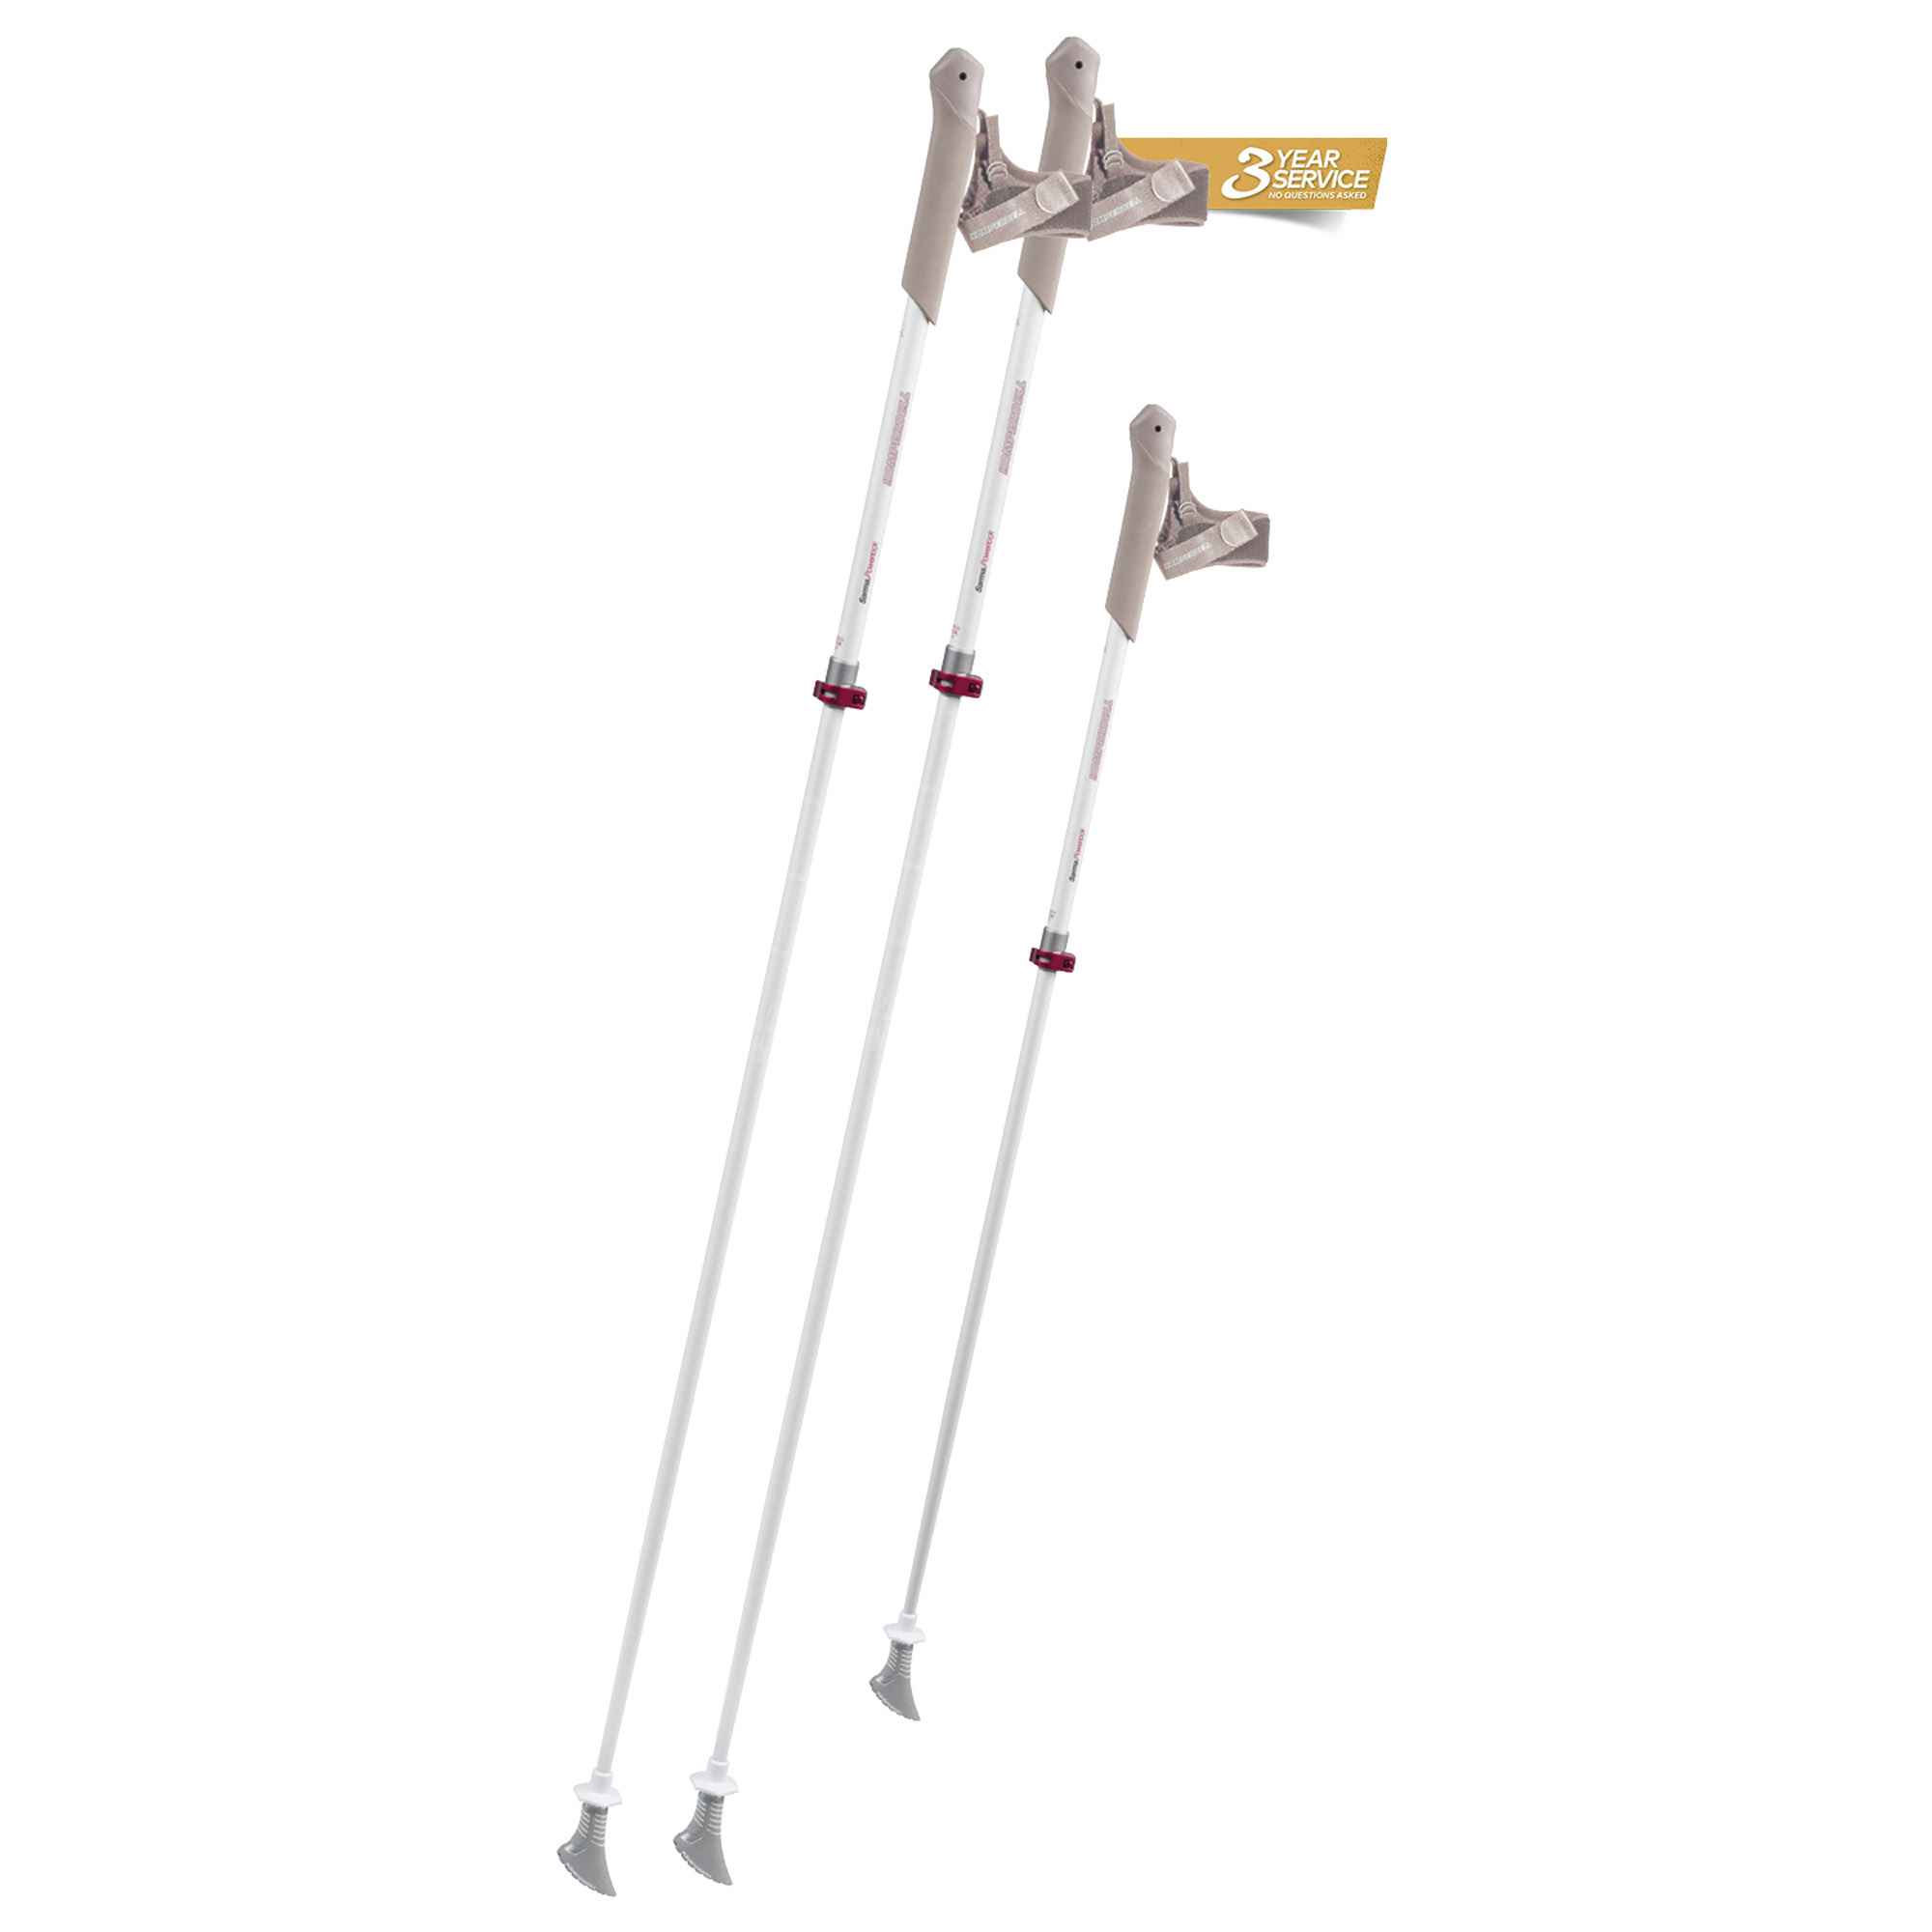 Accessory for Walking Poles I Nordic Walking Poles I Hand Straps with Click System I Nordic Walking Hand Straps Superletic® Hand Straps for Nordic Walking 